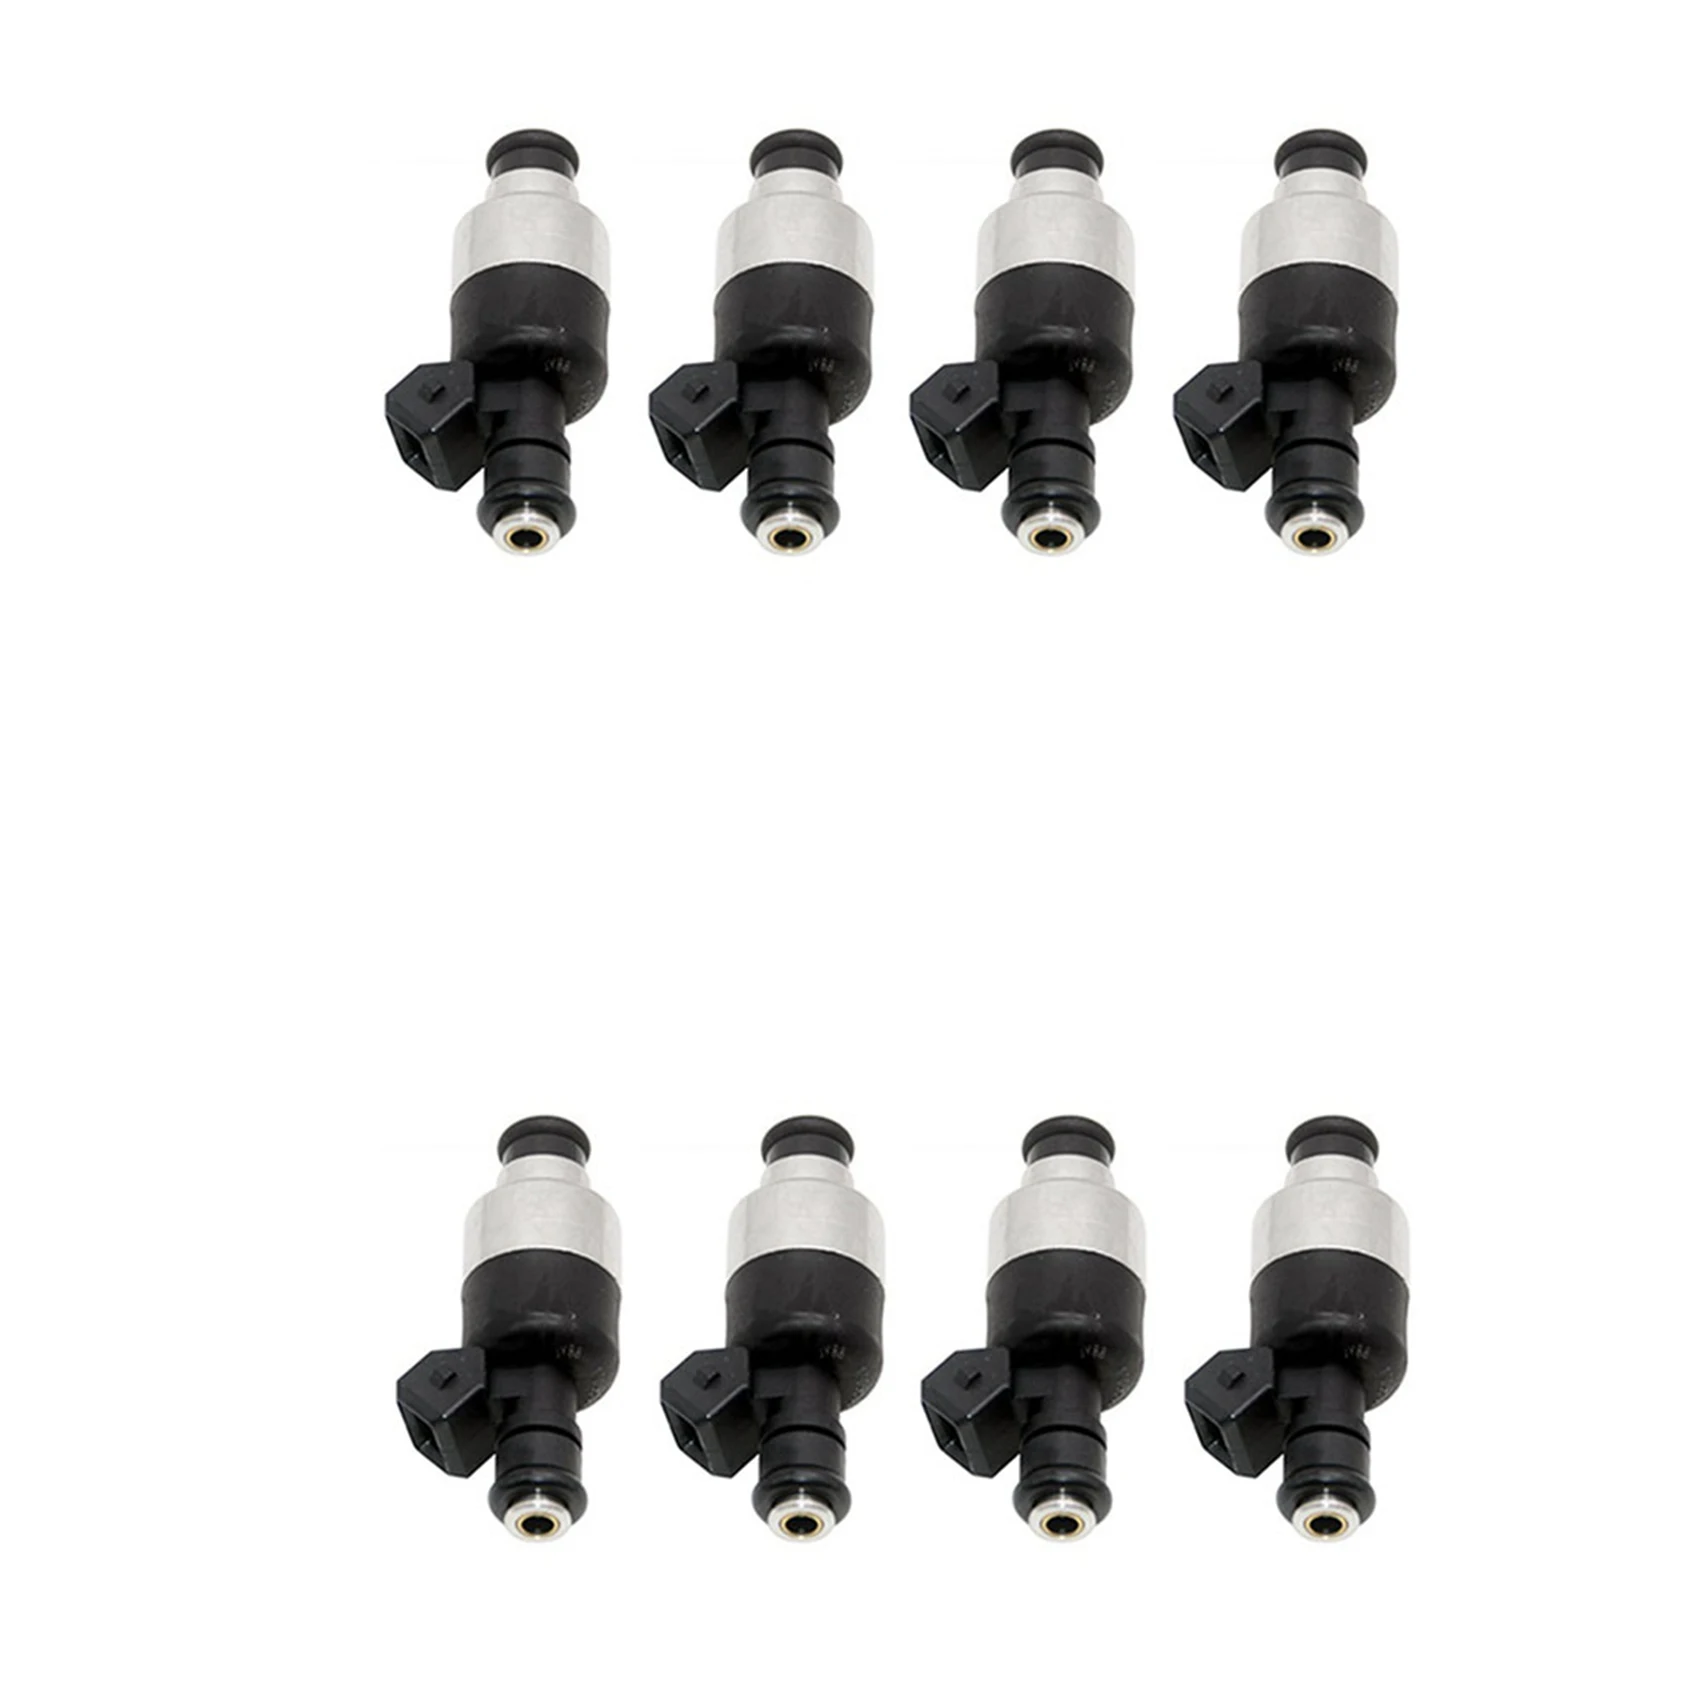 

8Pcs Fue Injector for Chevy Opel Corsa Daewoo Cielo 1.6 17124782 17123924 25165453 17103677 ICD00110 17108045